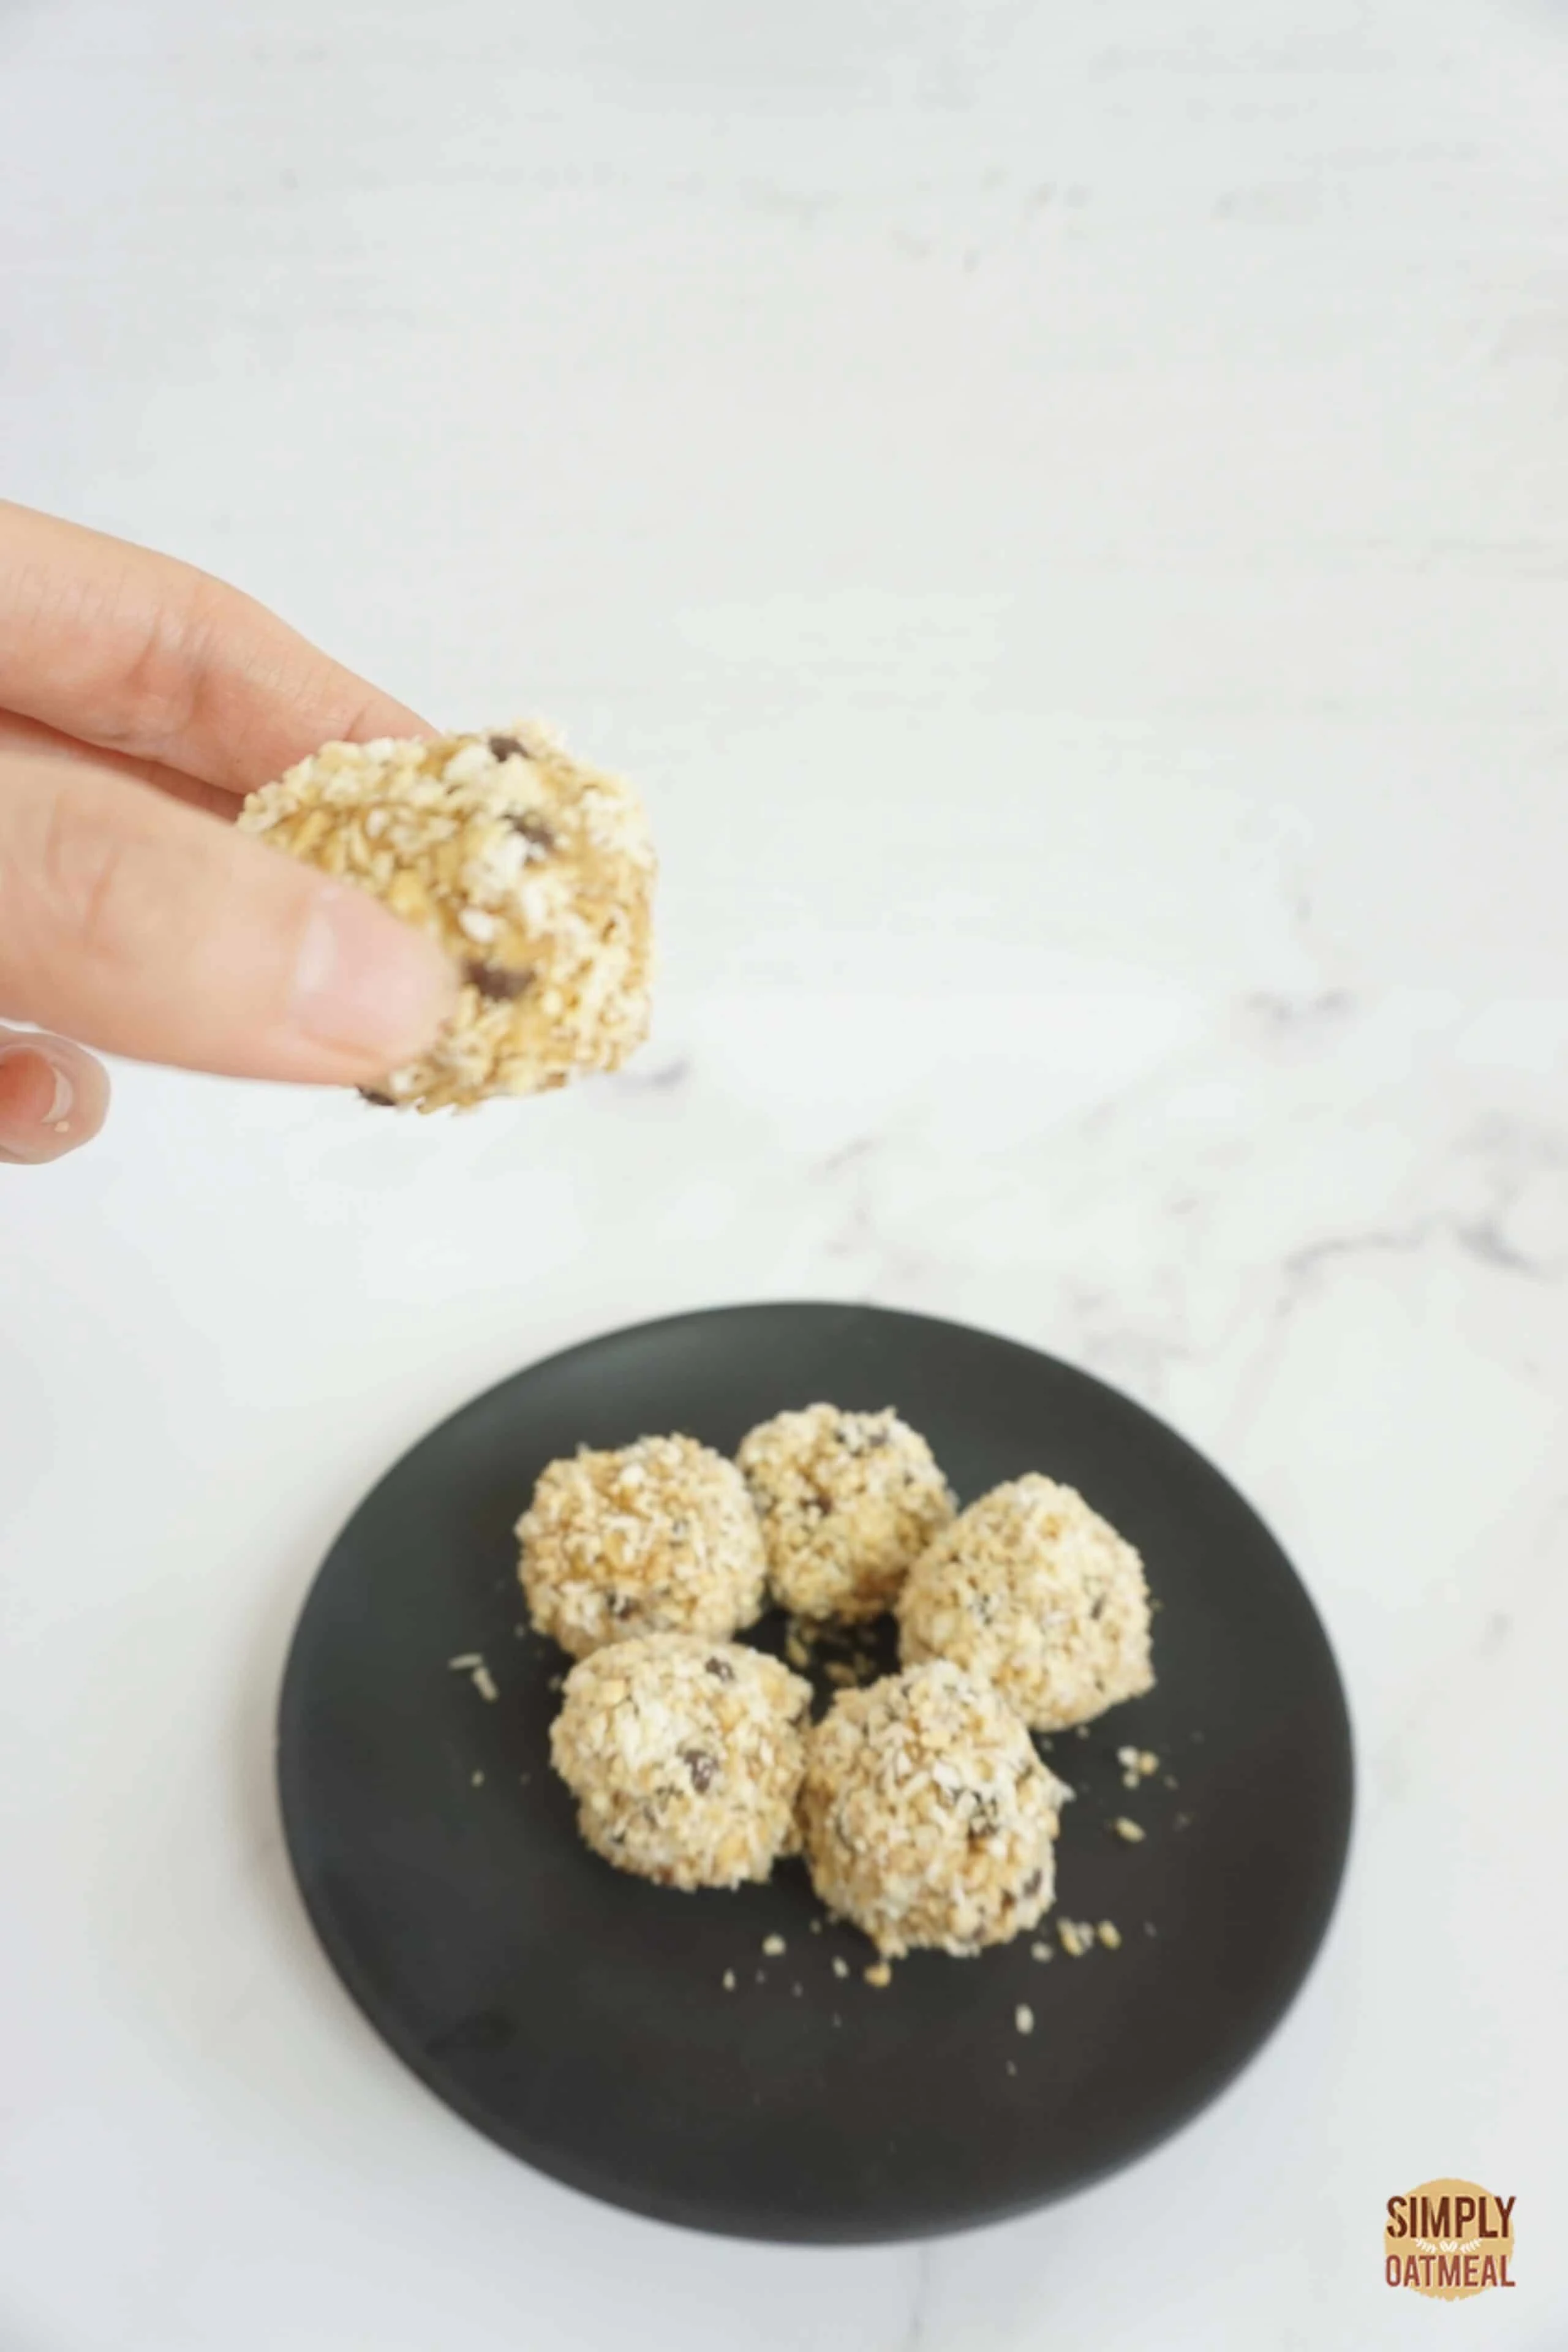 Fingers holding one no bake peanut butter oatmeal ball